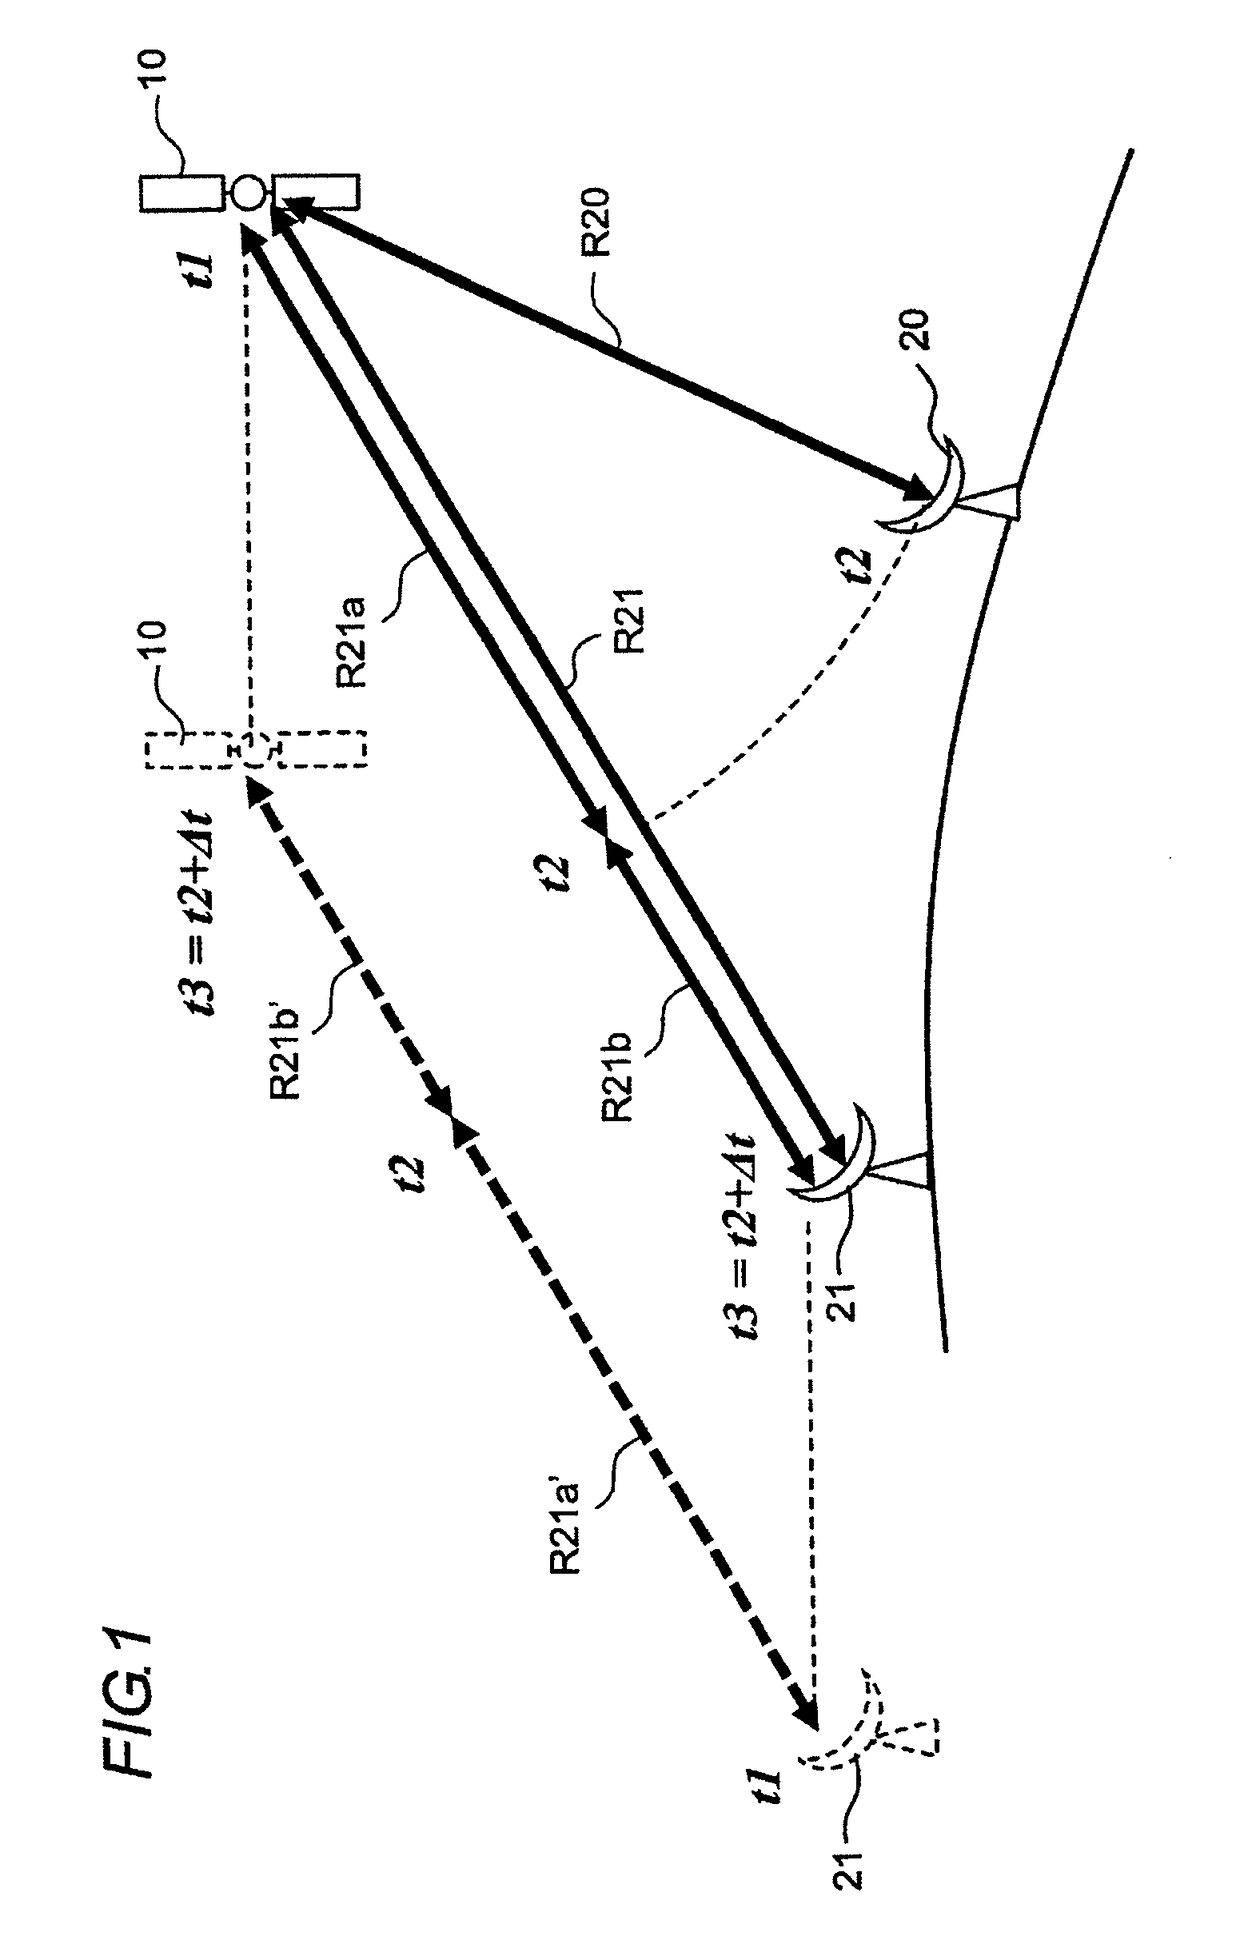 Position measurement system for geostationary artificial satellite